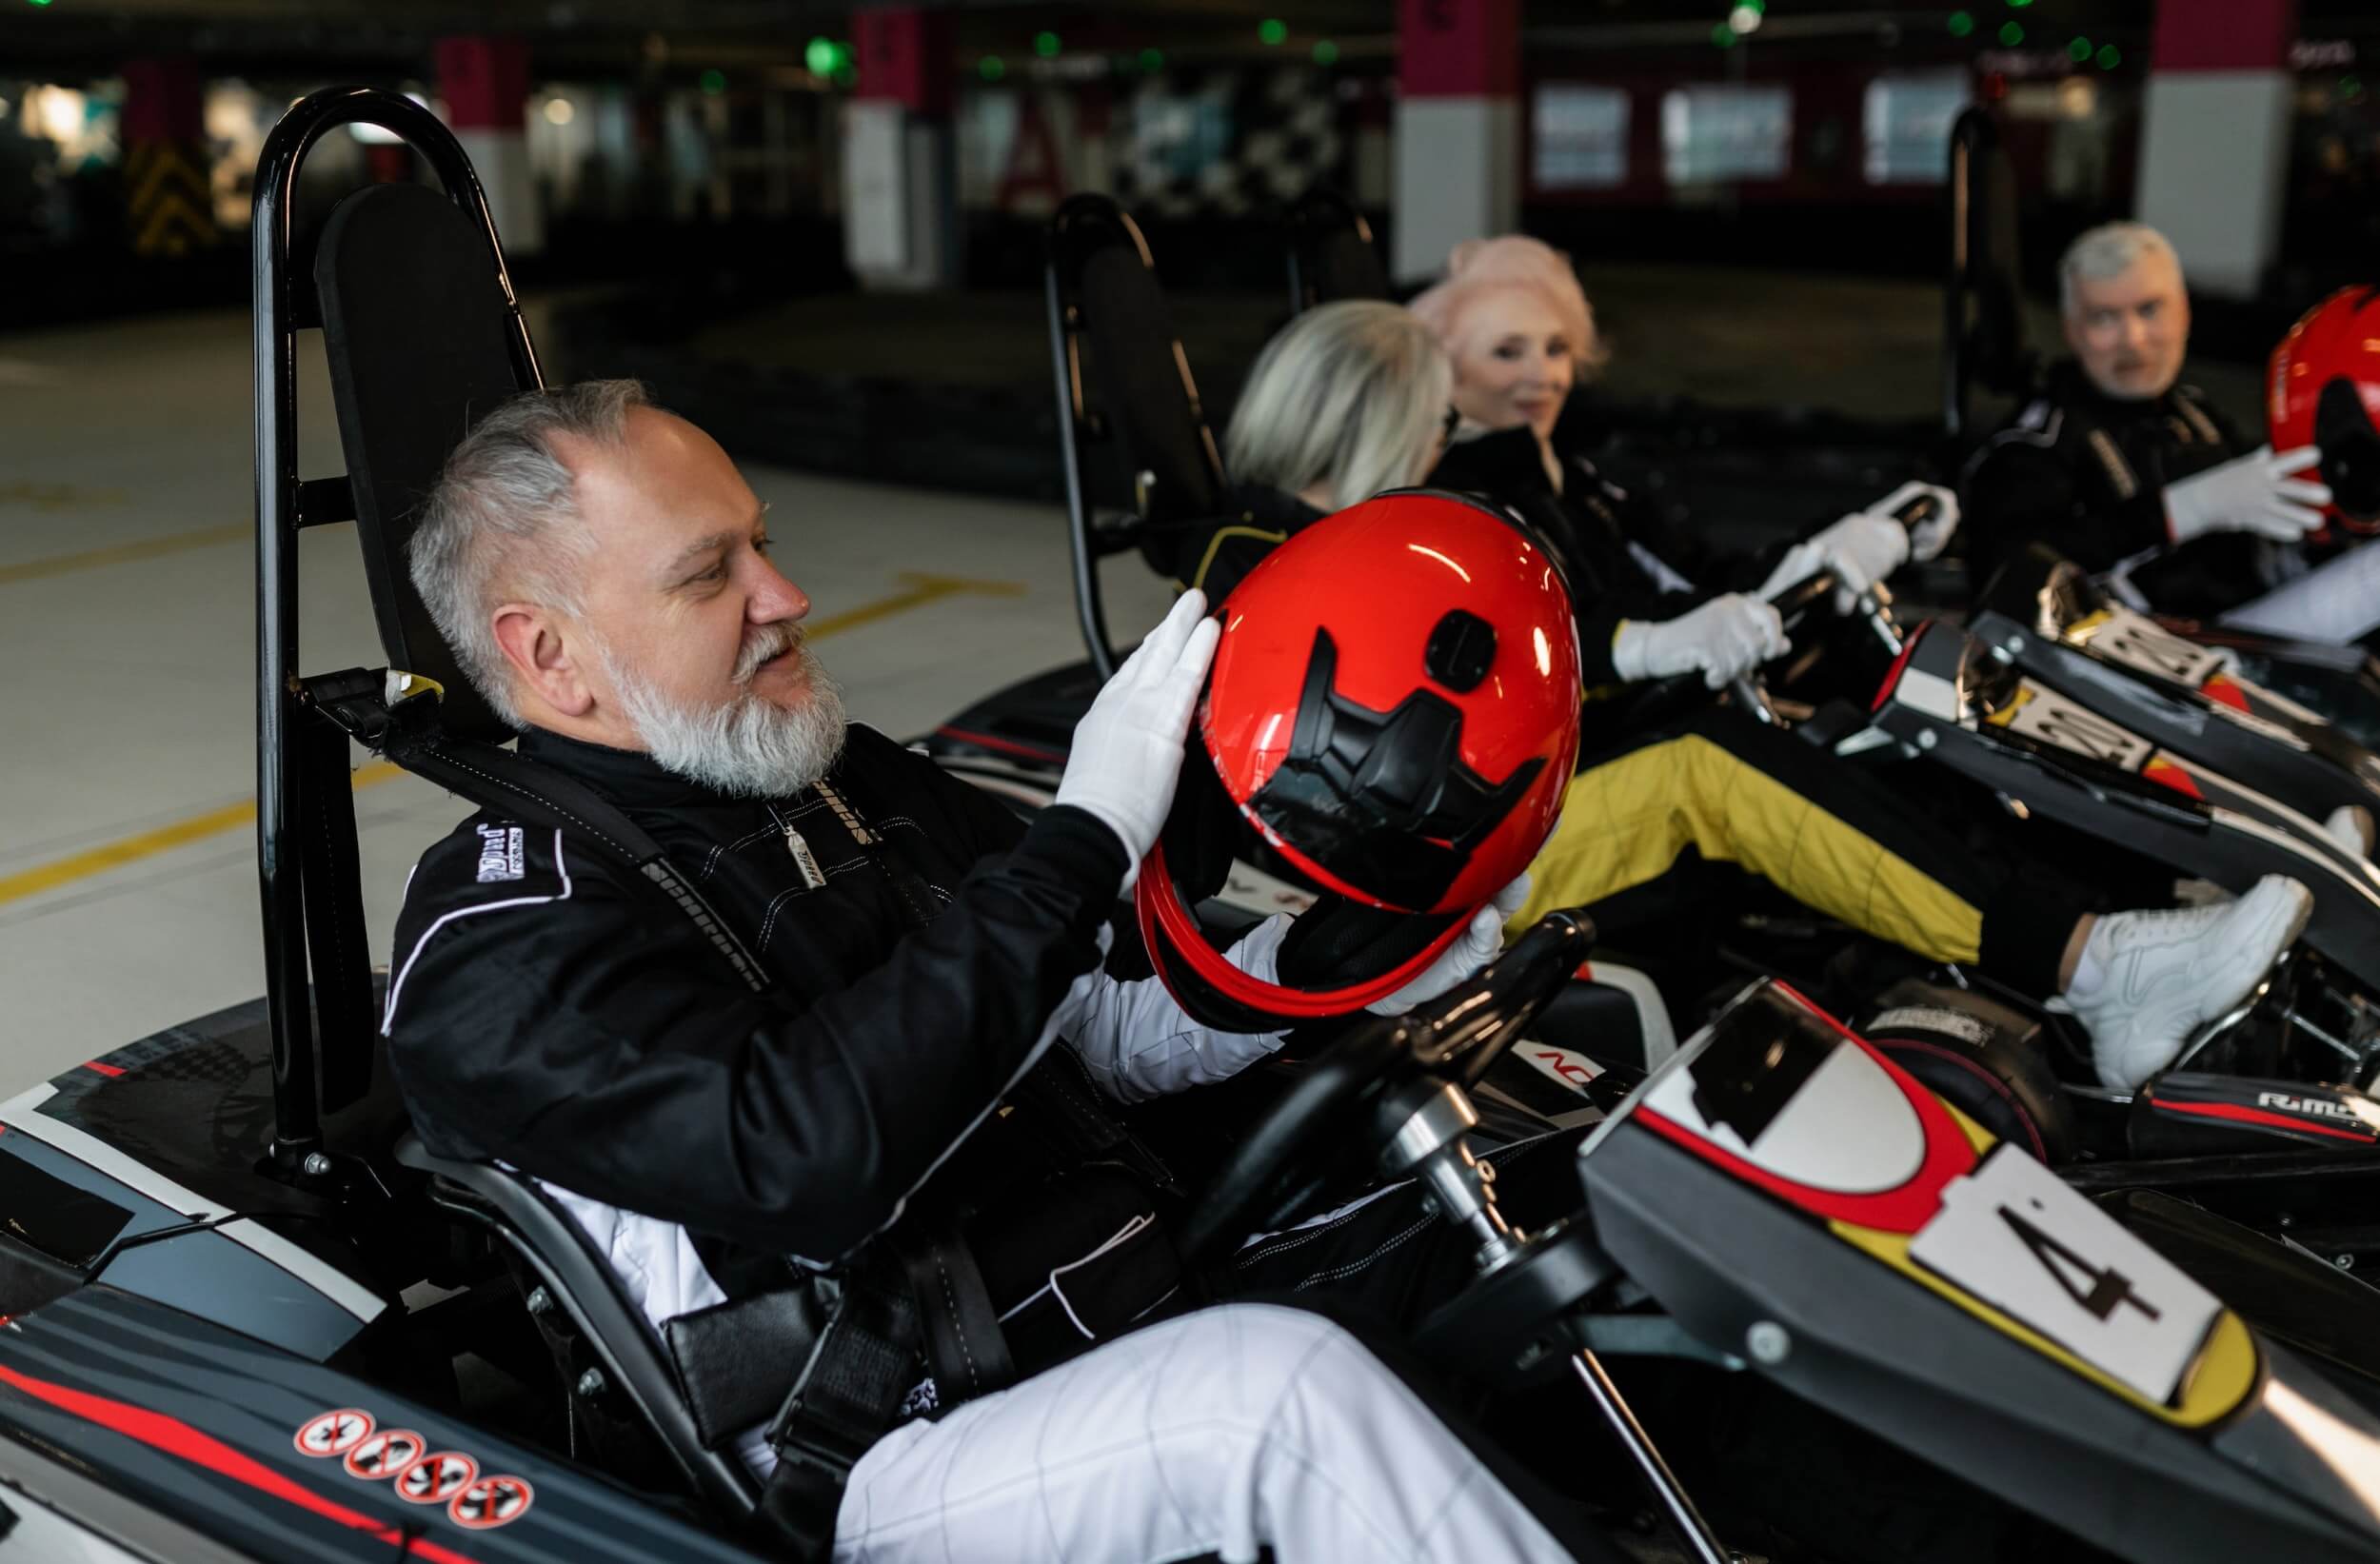 Man with beard sitting in a go-kart putting on a helmet